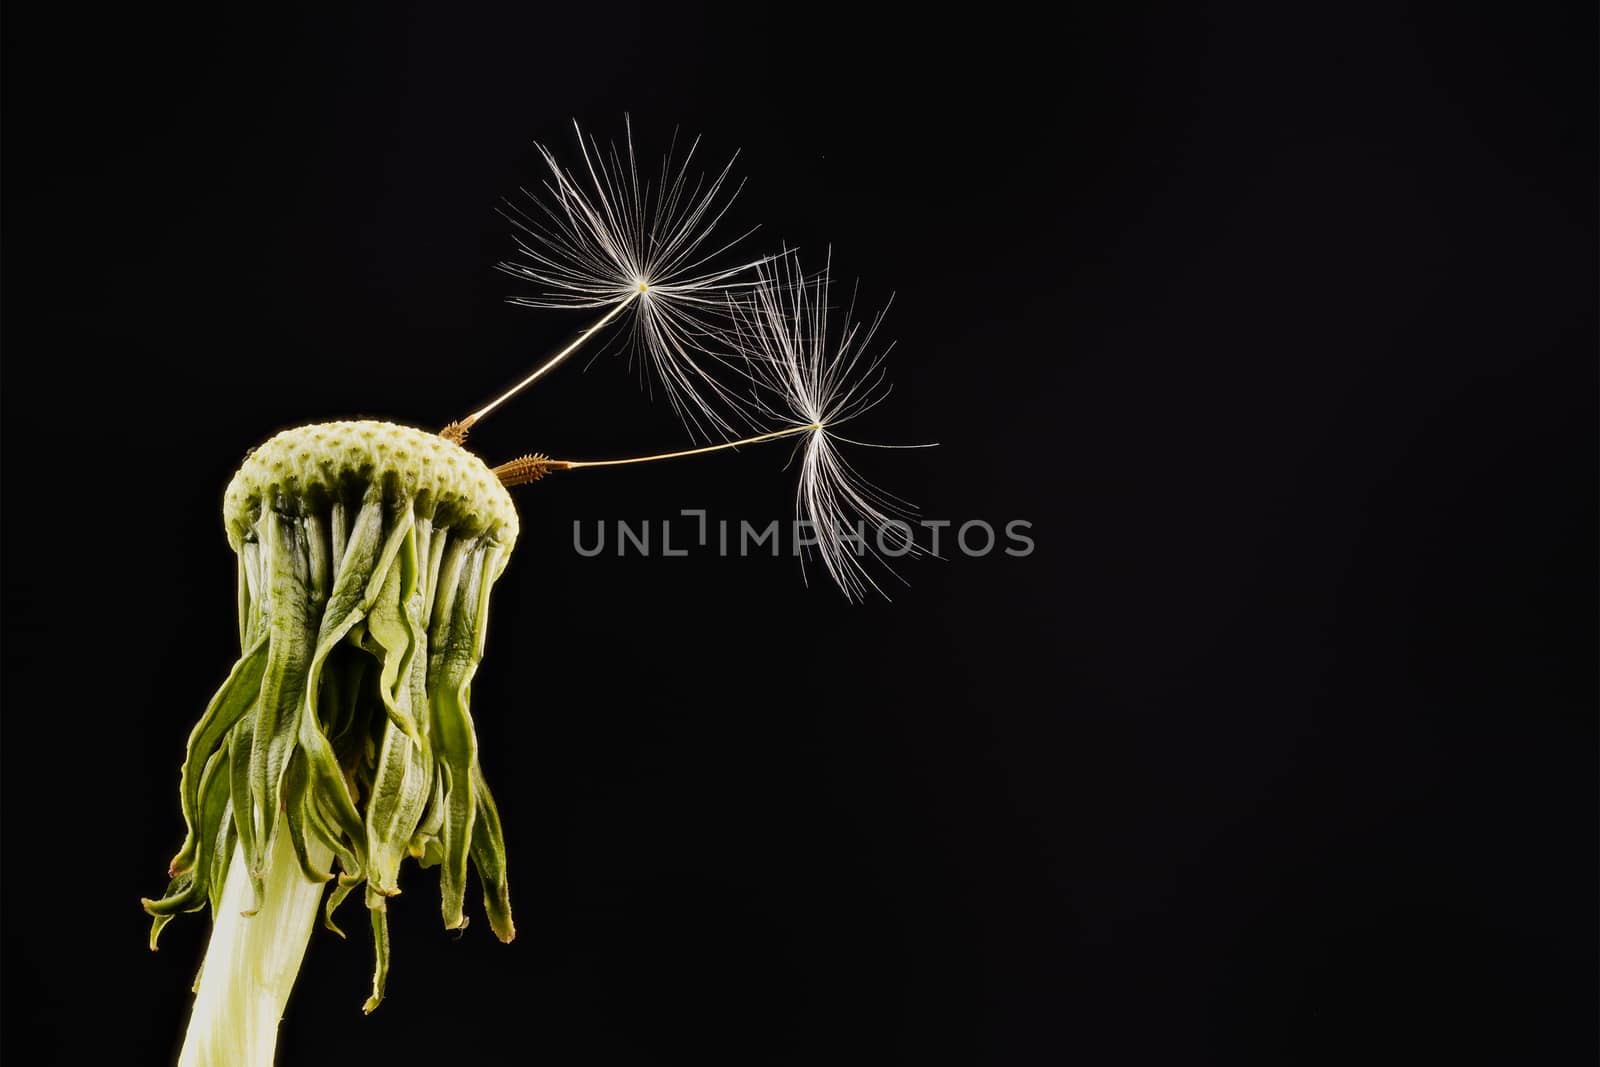 Close-up of dandelion isolated on the black background